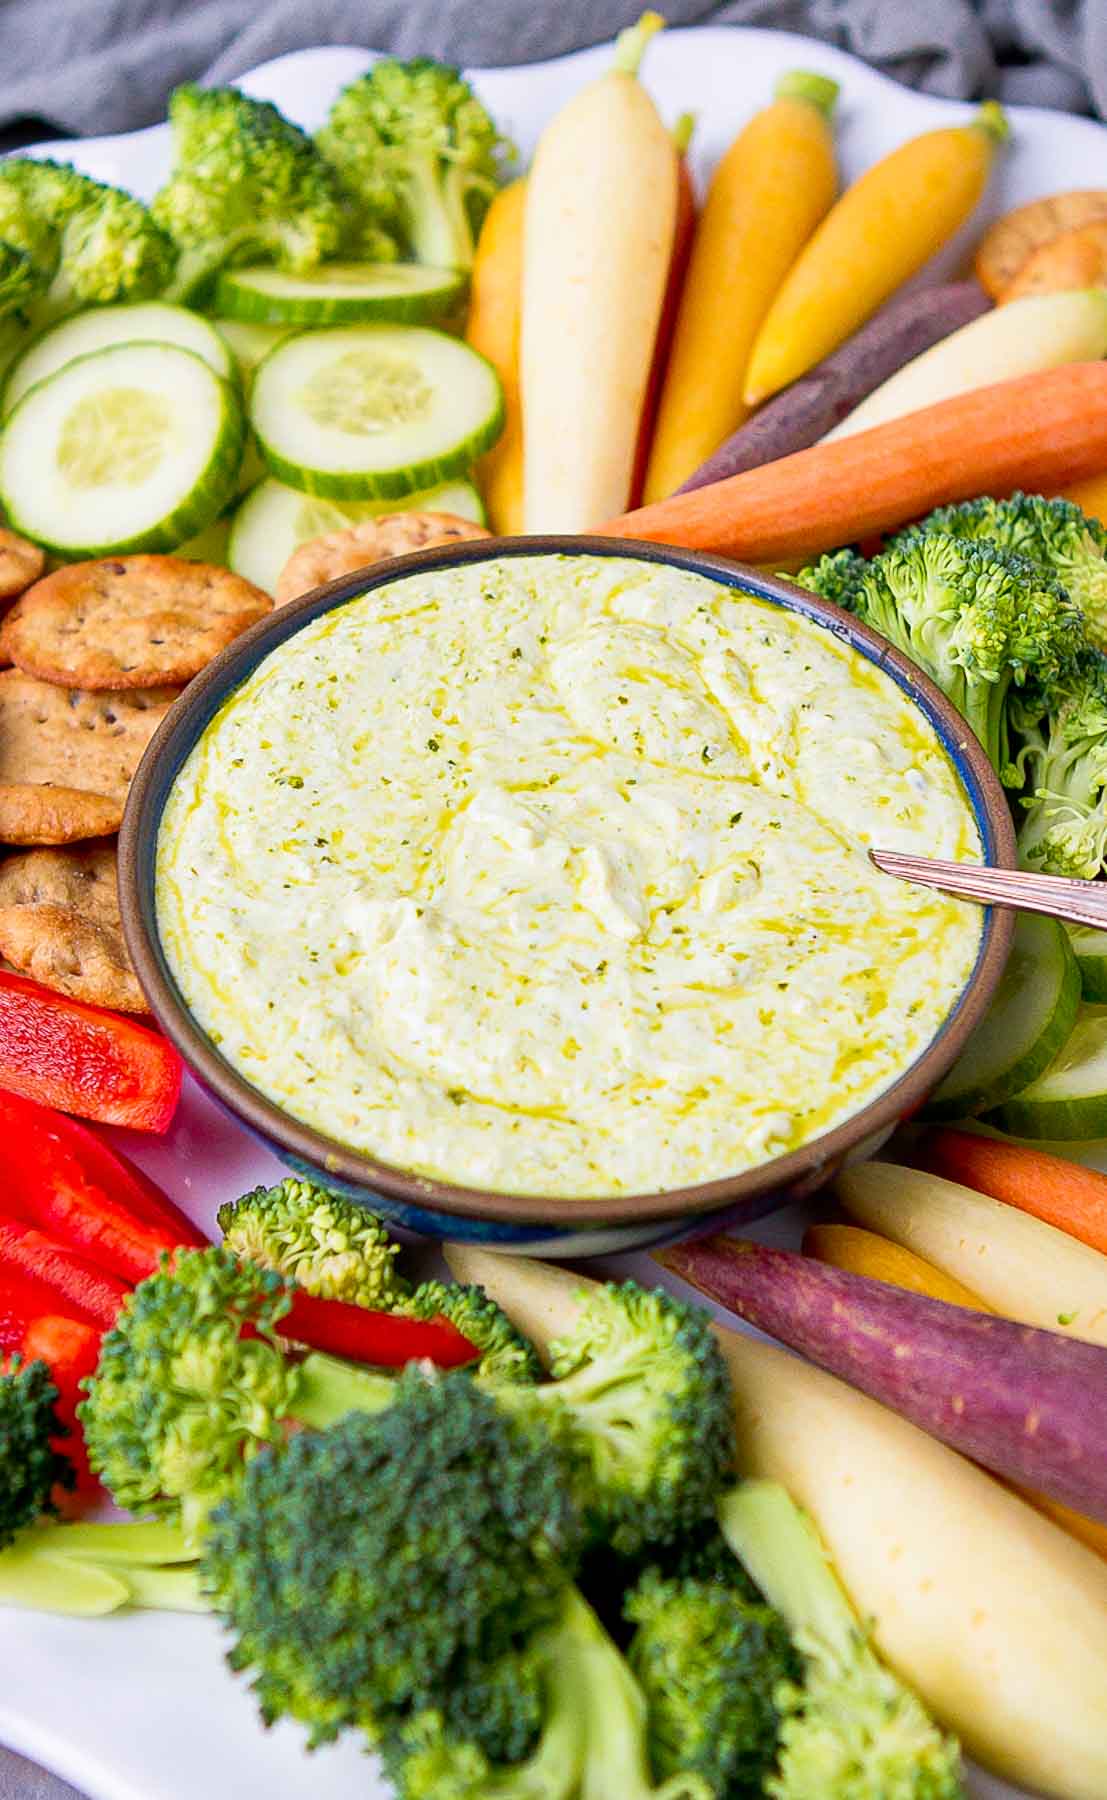 Pesto dip in a bowl, surrounded by raw vegetables and crackers.